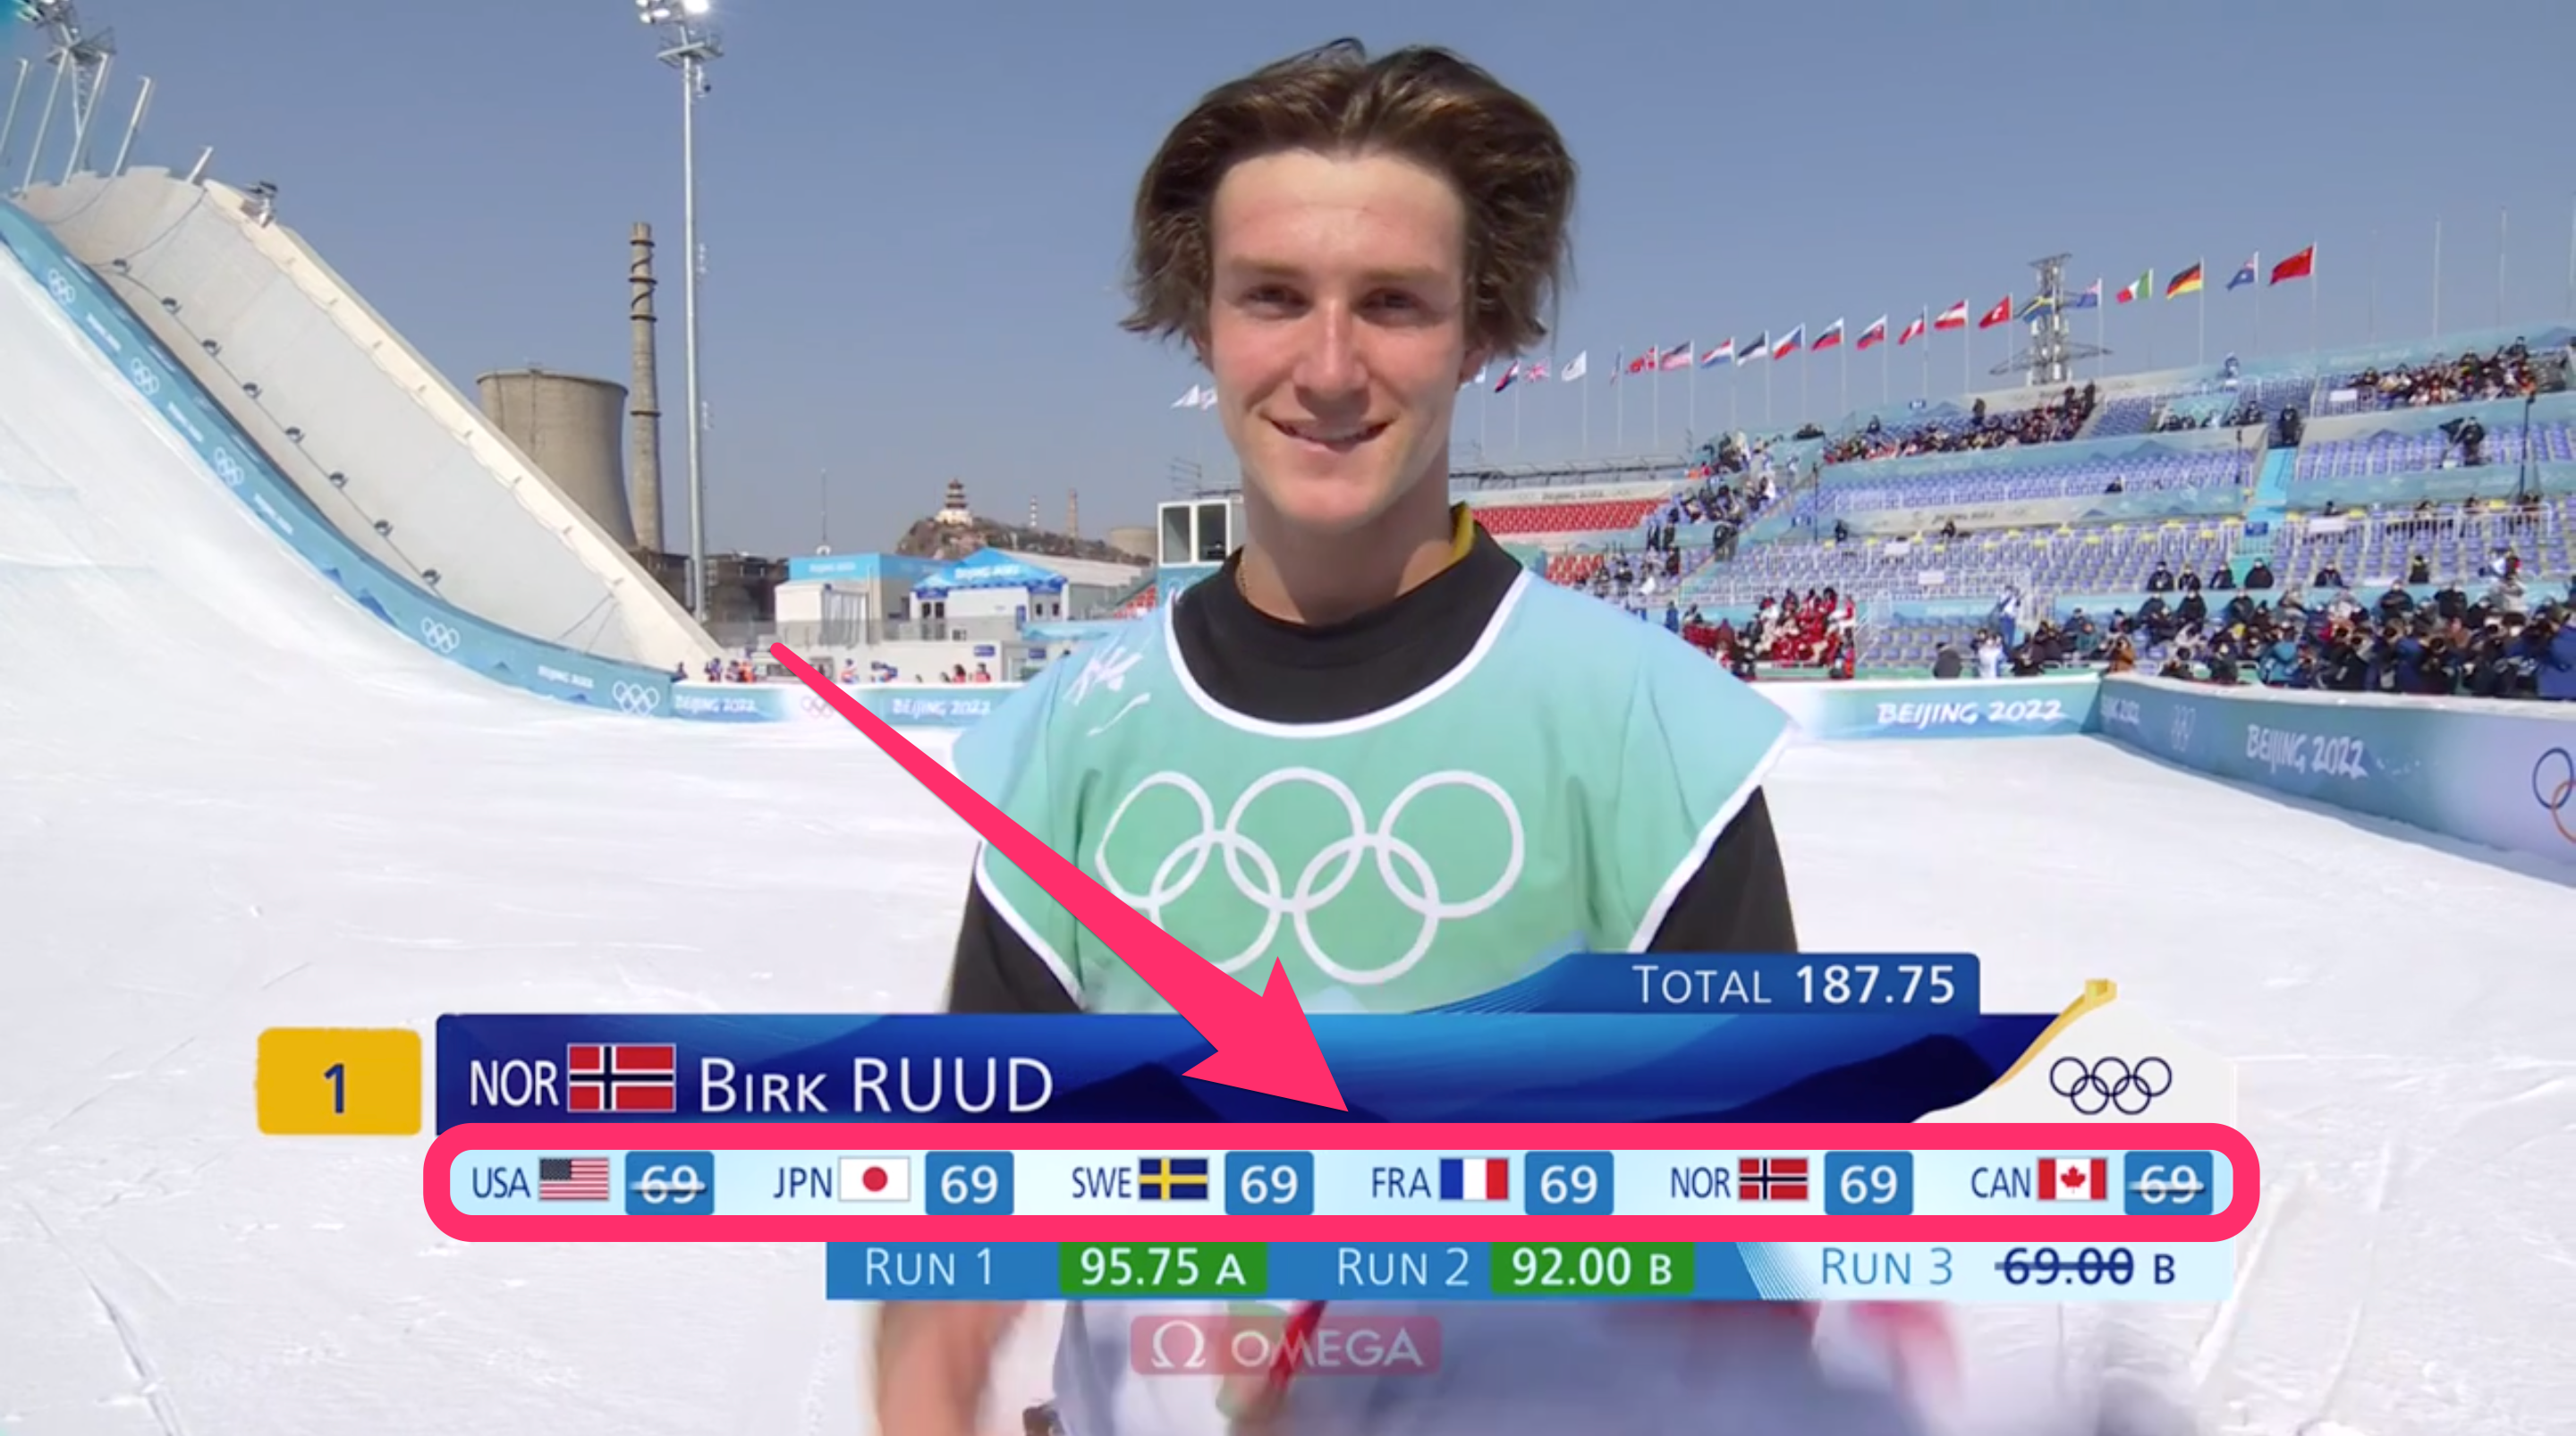 Birk Rudd earns a 69 on his victory lap in the men's big air final at the Beijing Olympics.